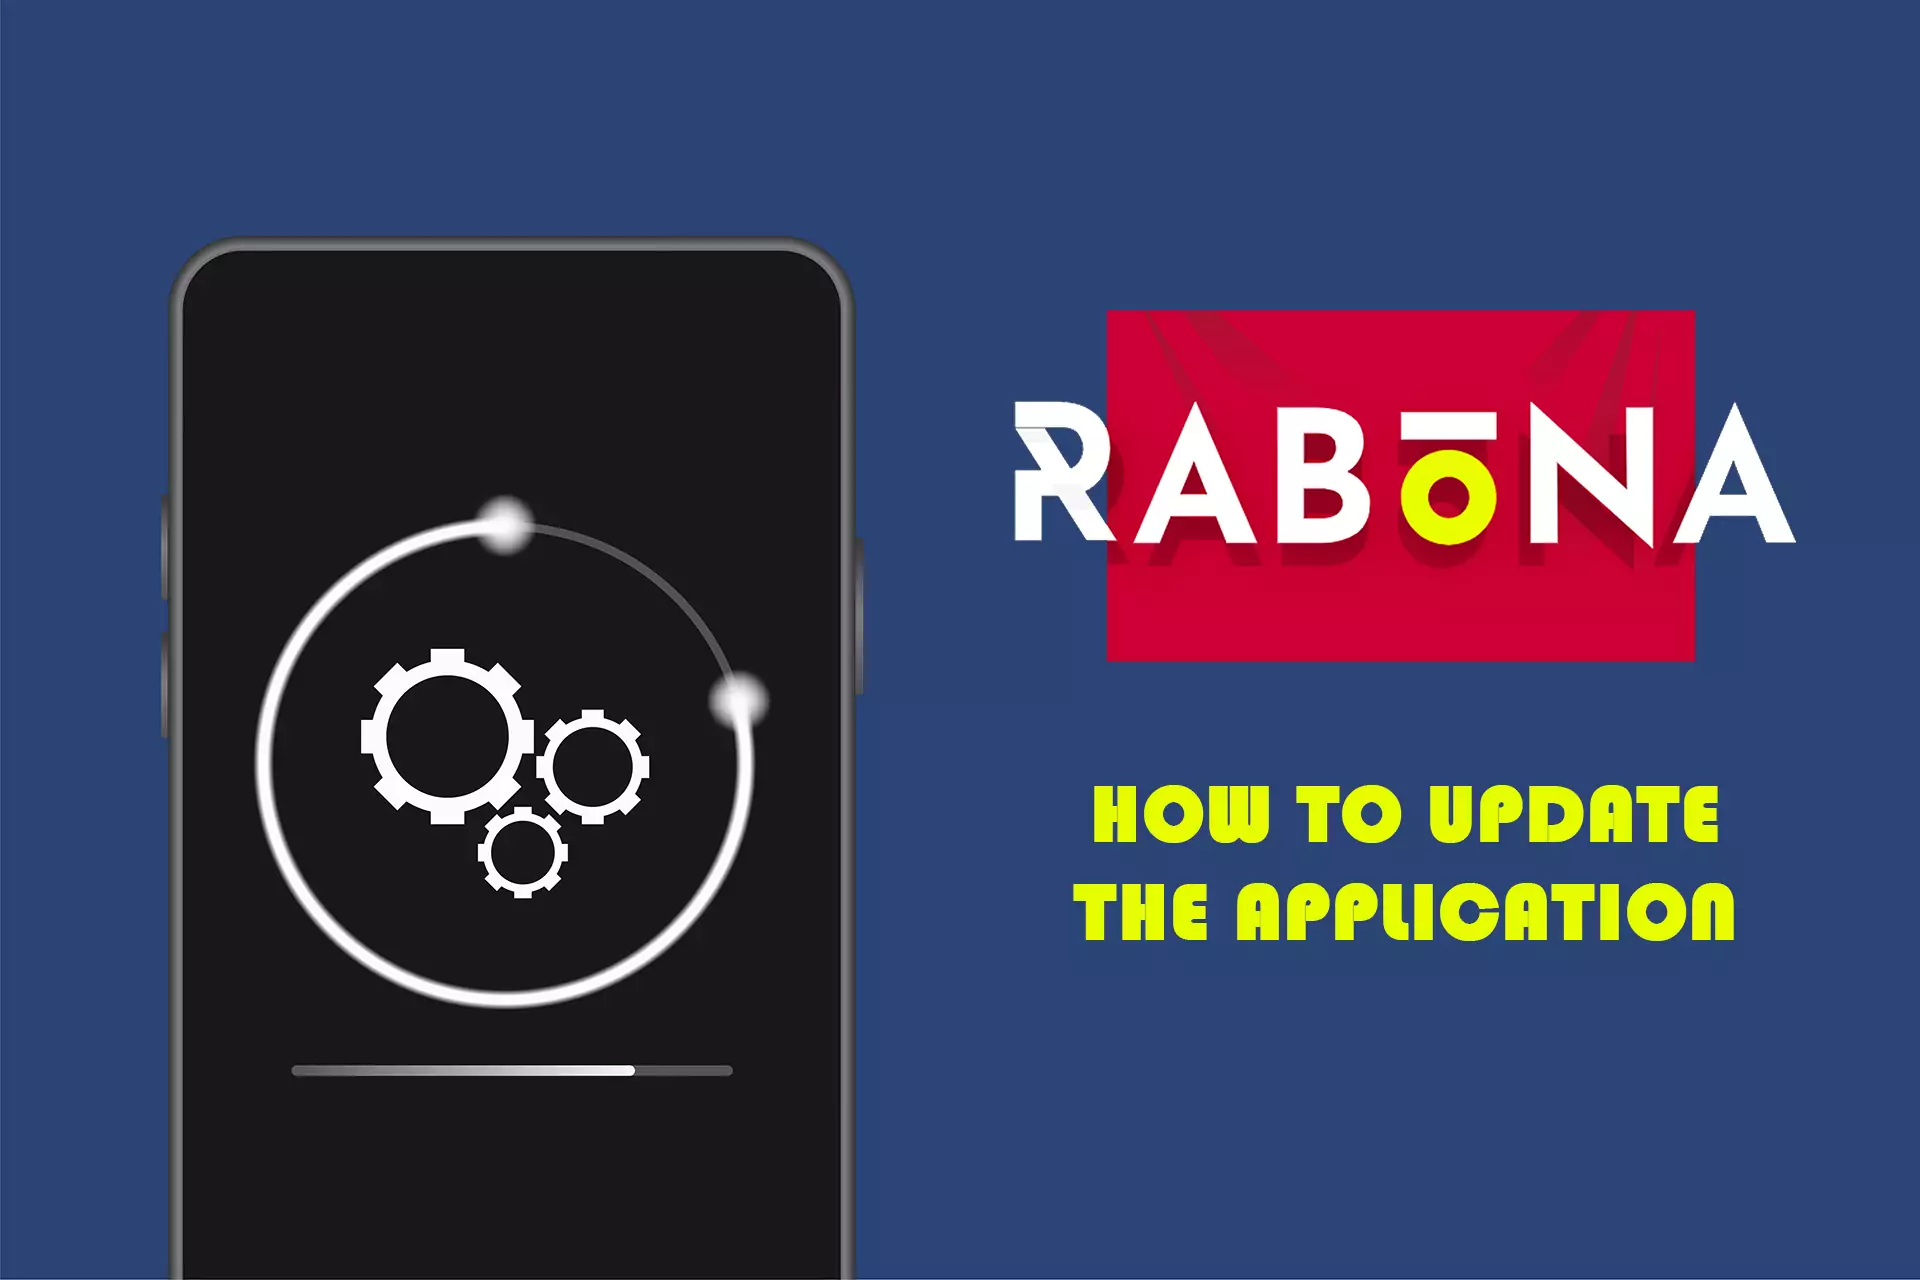 The app of the Rabona updates automatically.